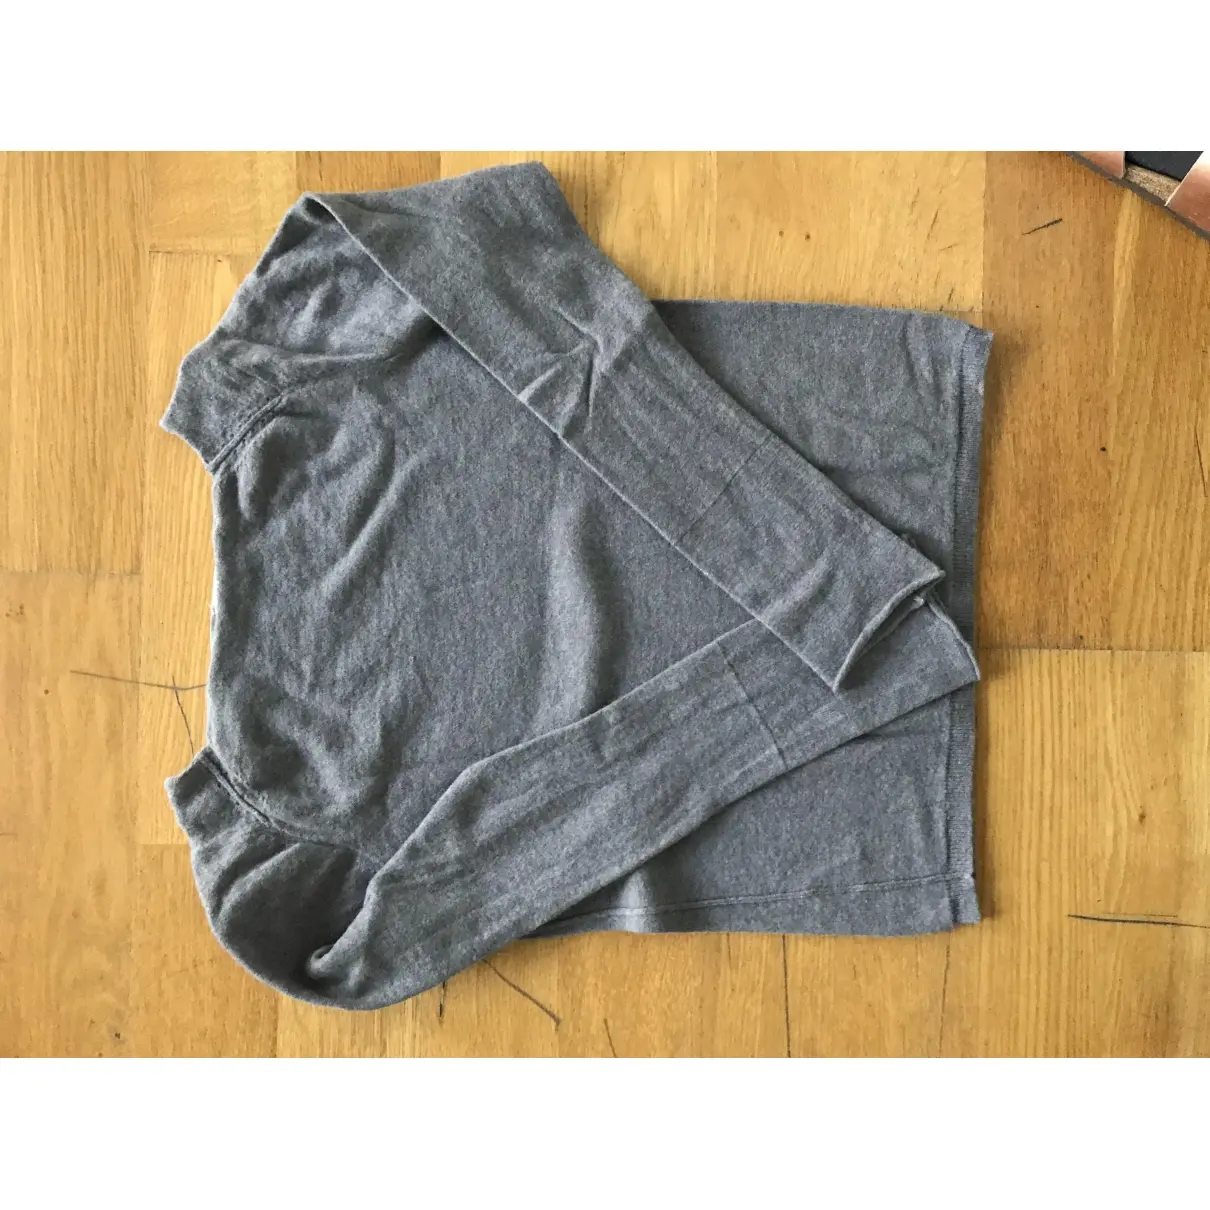 Humanoid Wool jumper for sale